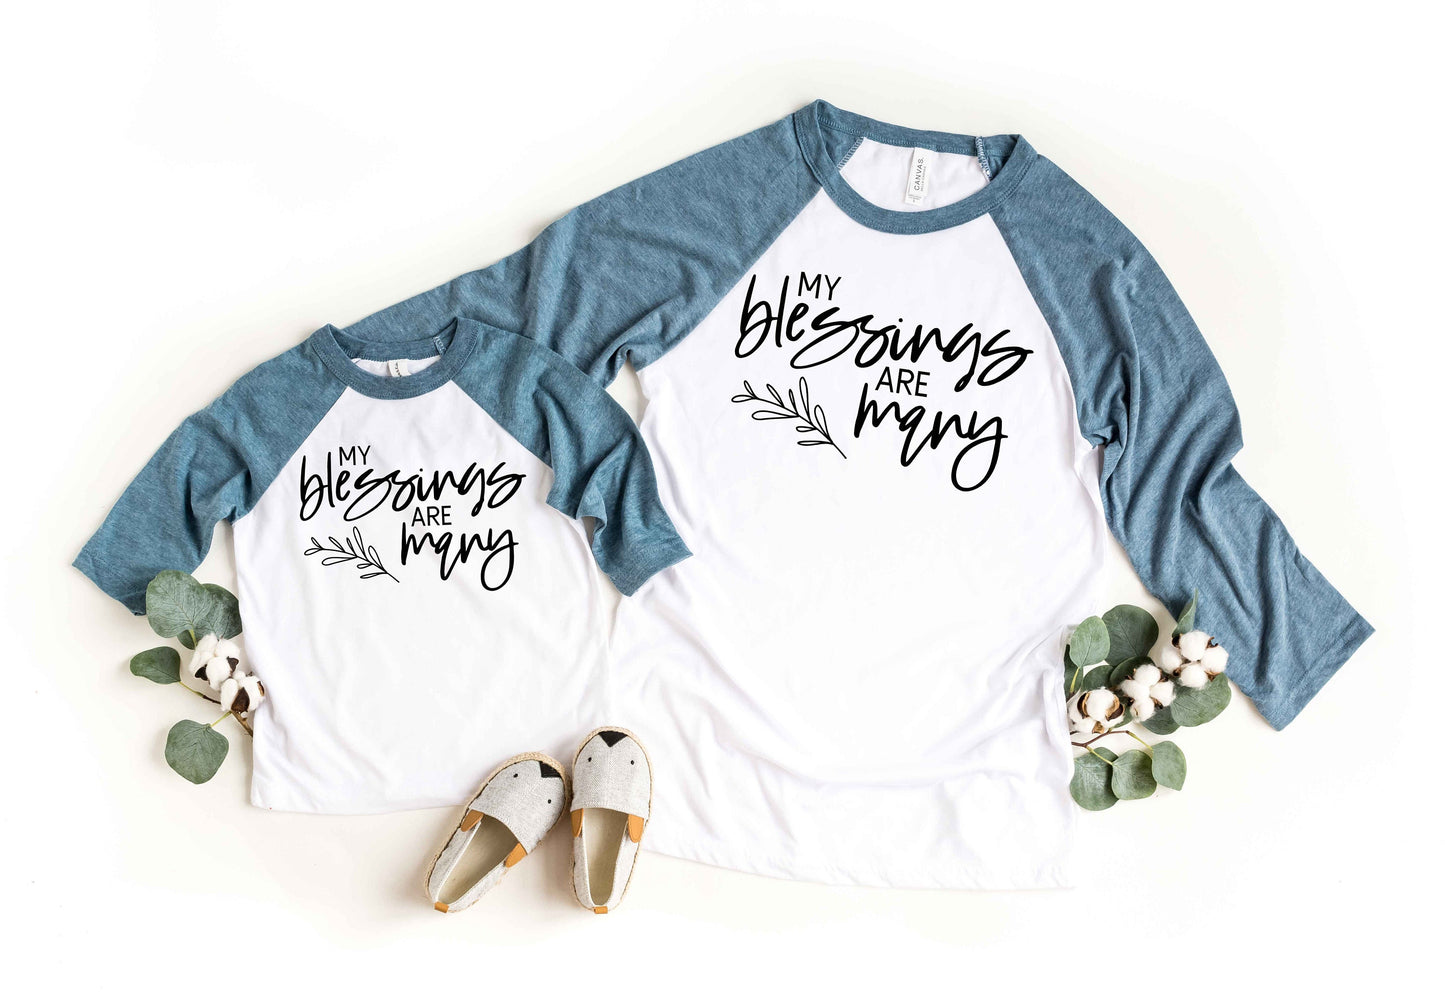 My Blessings are Many Raglan t-shirt - Thanksgiving Shirt - Adult and Kids SIzes